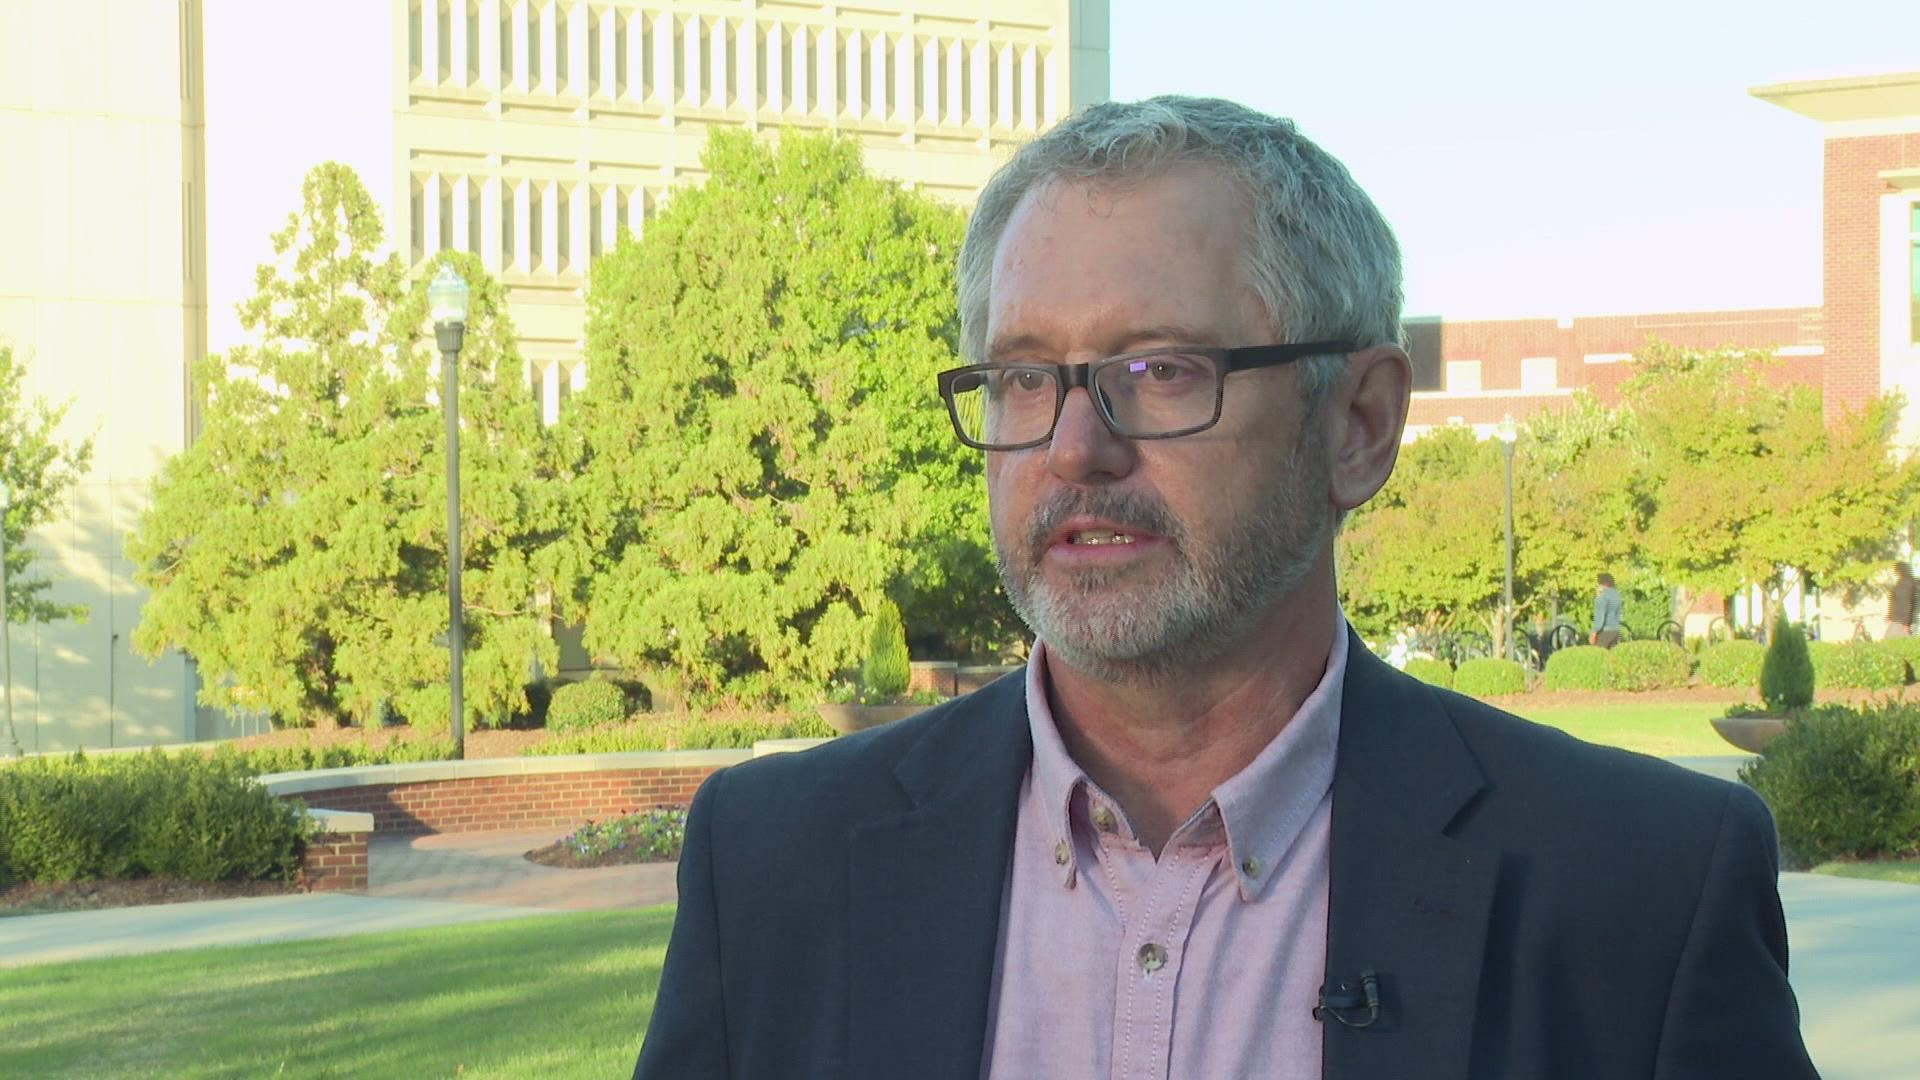 Dr. Bob Strack, Public Health professor at UNC-Greensboro takes a deep dive into COVID-19 vaccine resistance in an interview with WFMY’s Chad Silber.